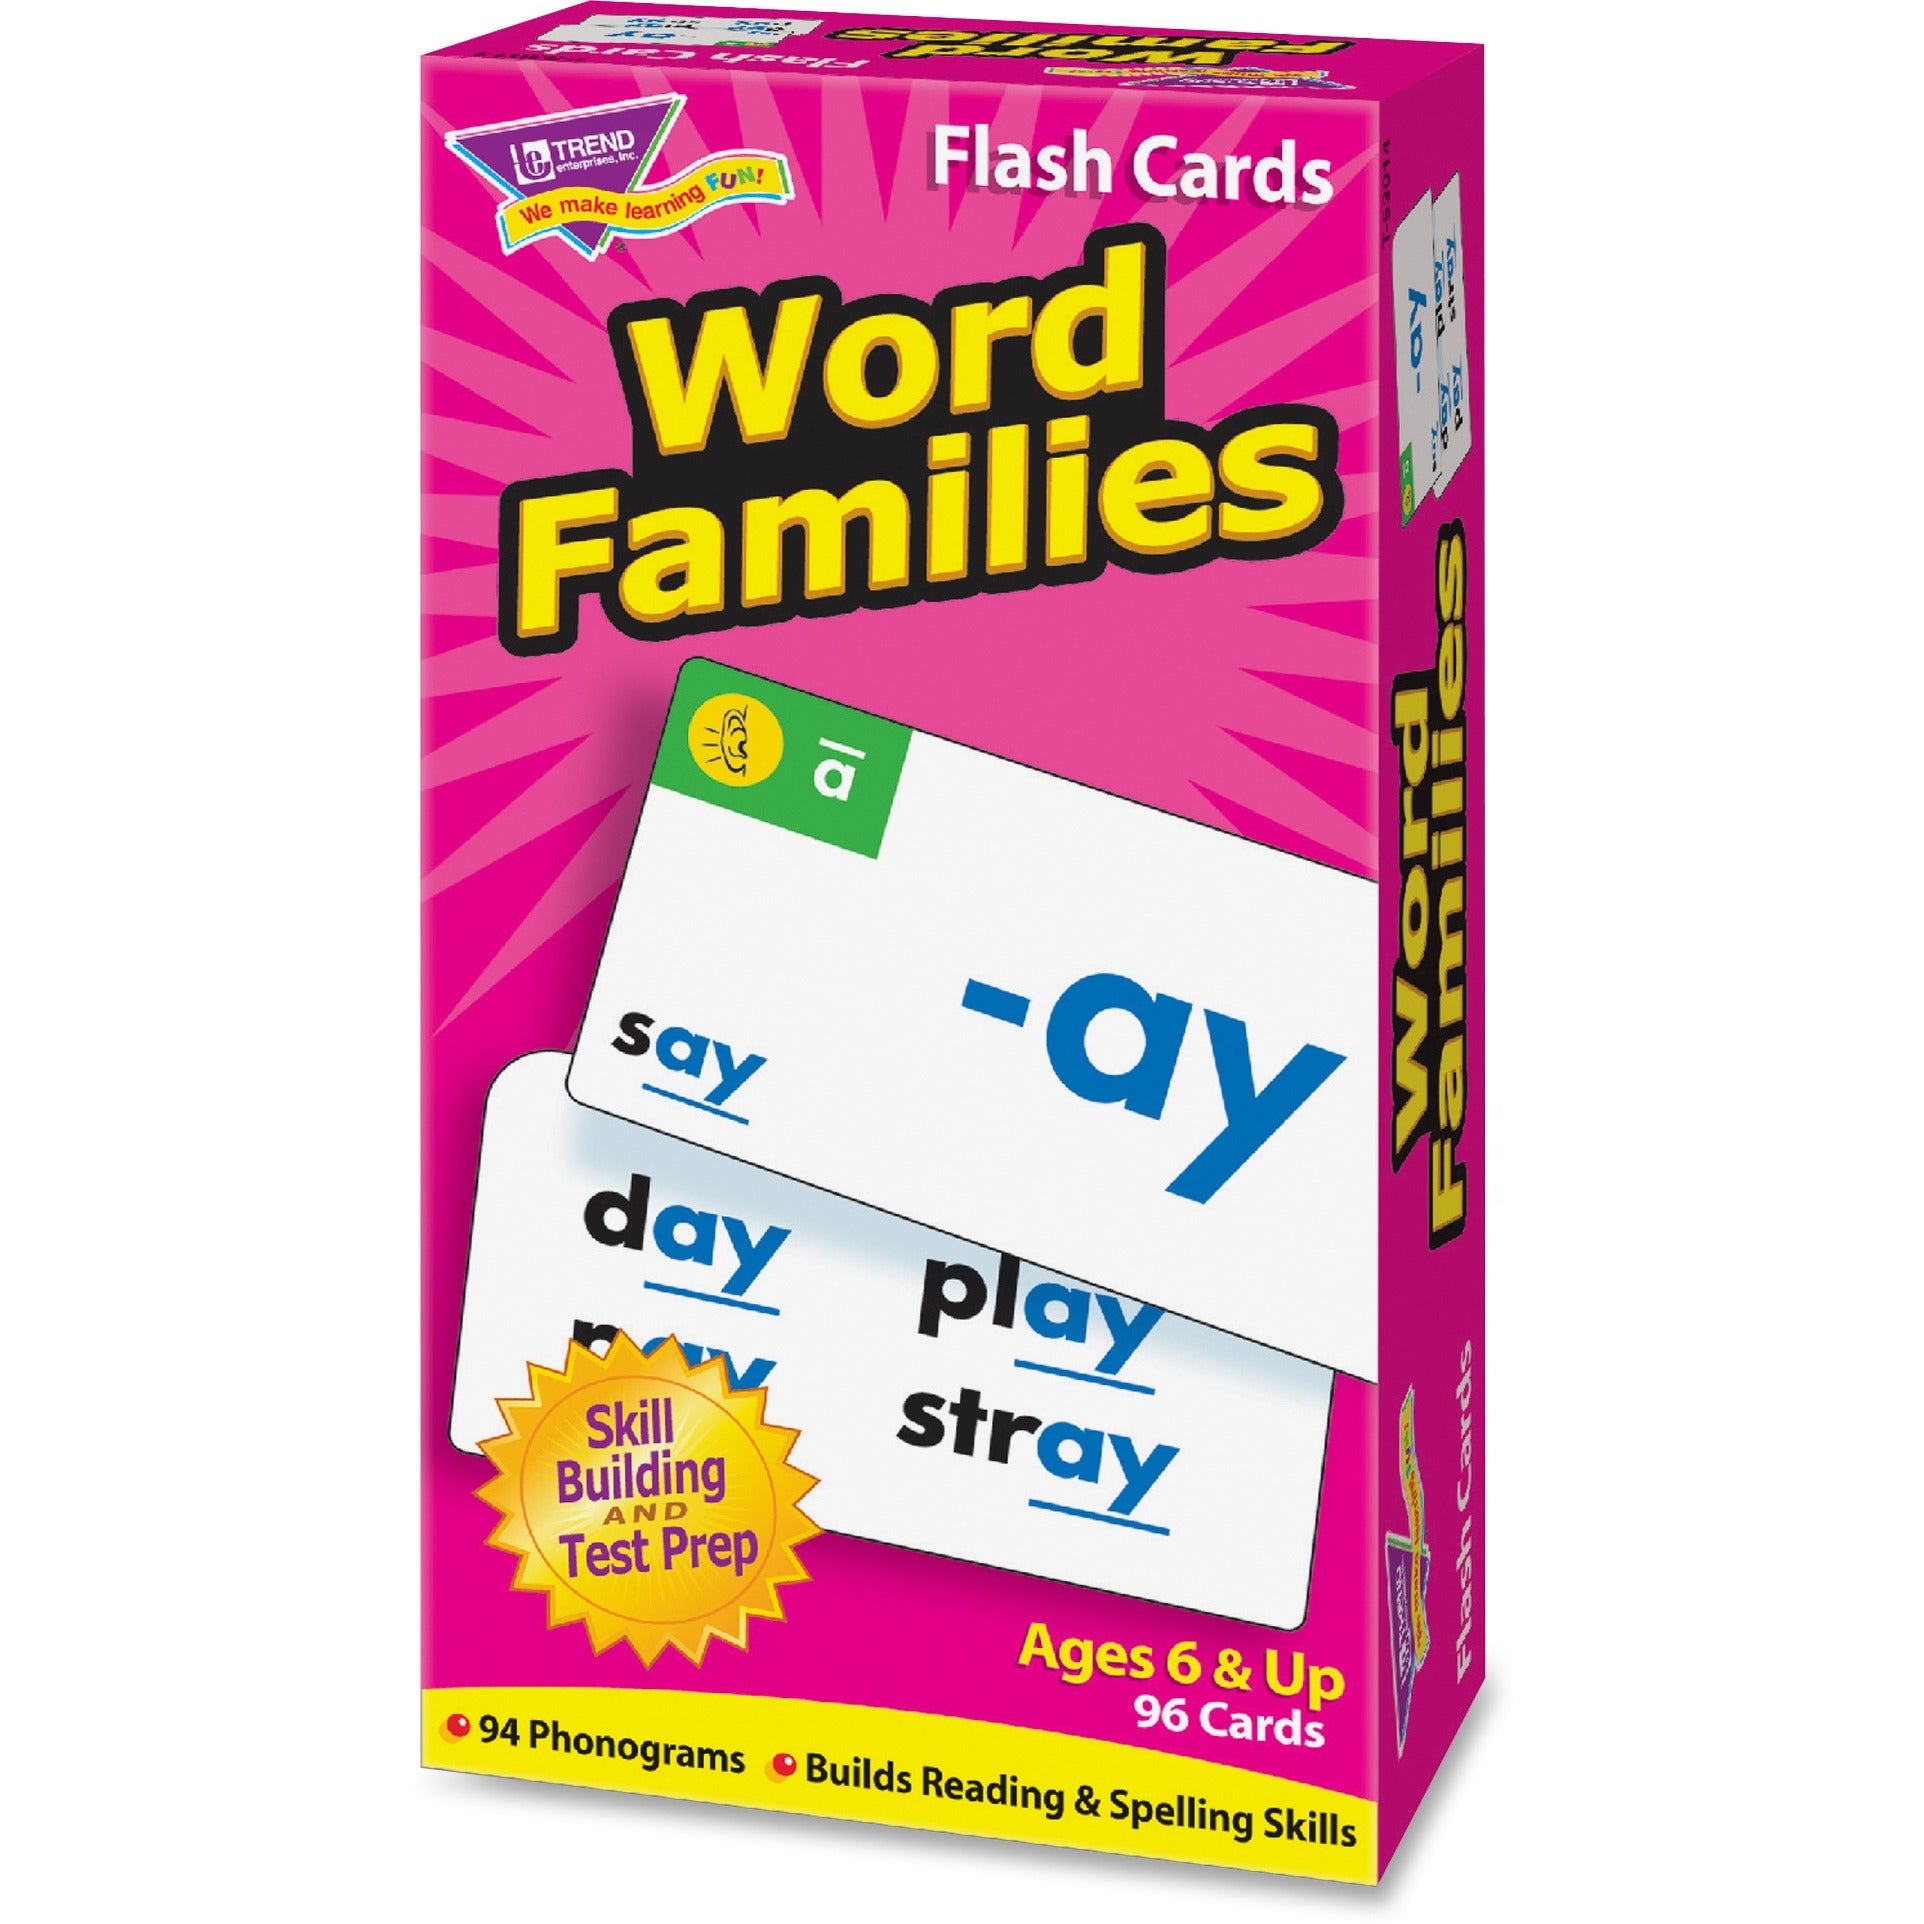 Trend Word Skill Building Flash Cards - Educational - 1 Each - 